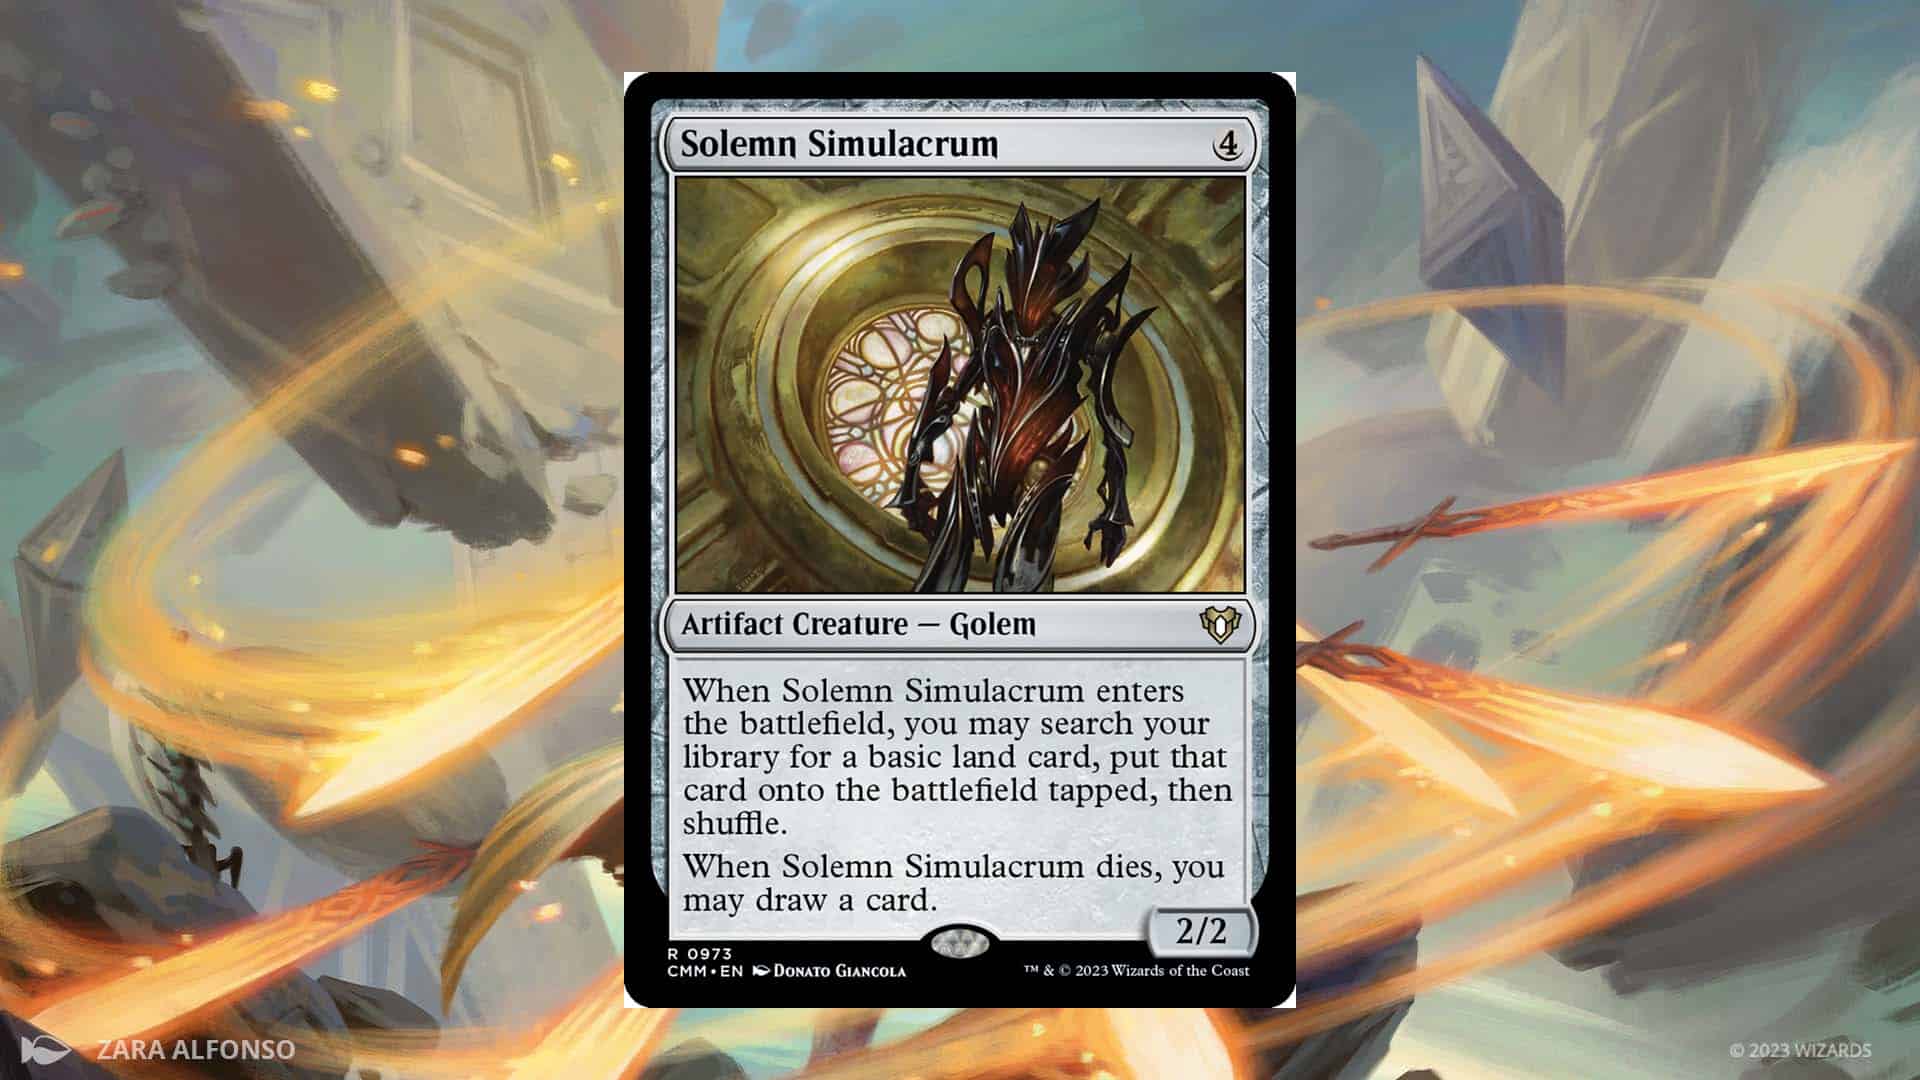 Picture of Solmen Simulacrum from Magic: the Gathering